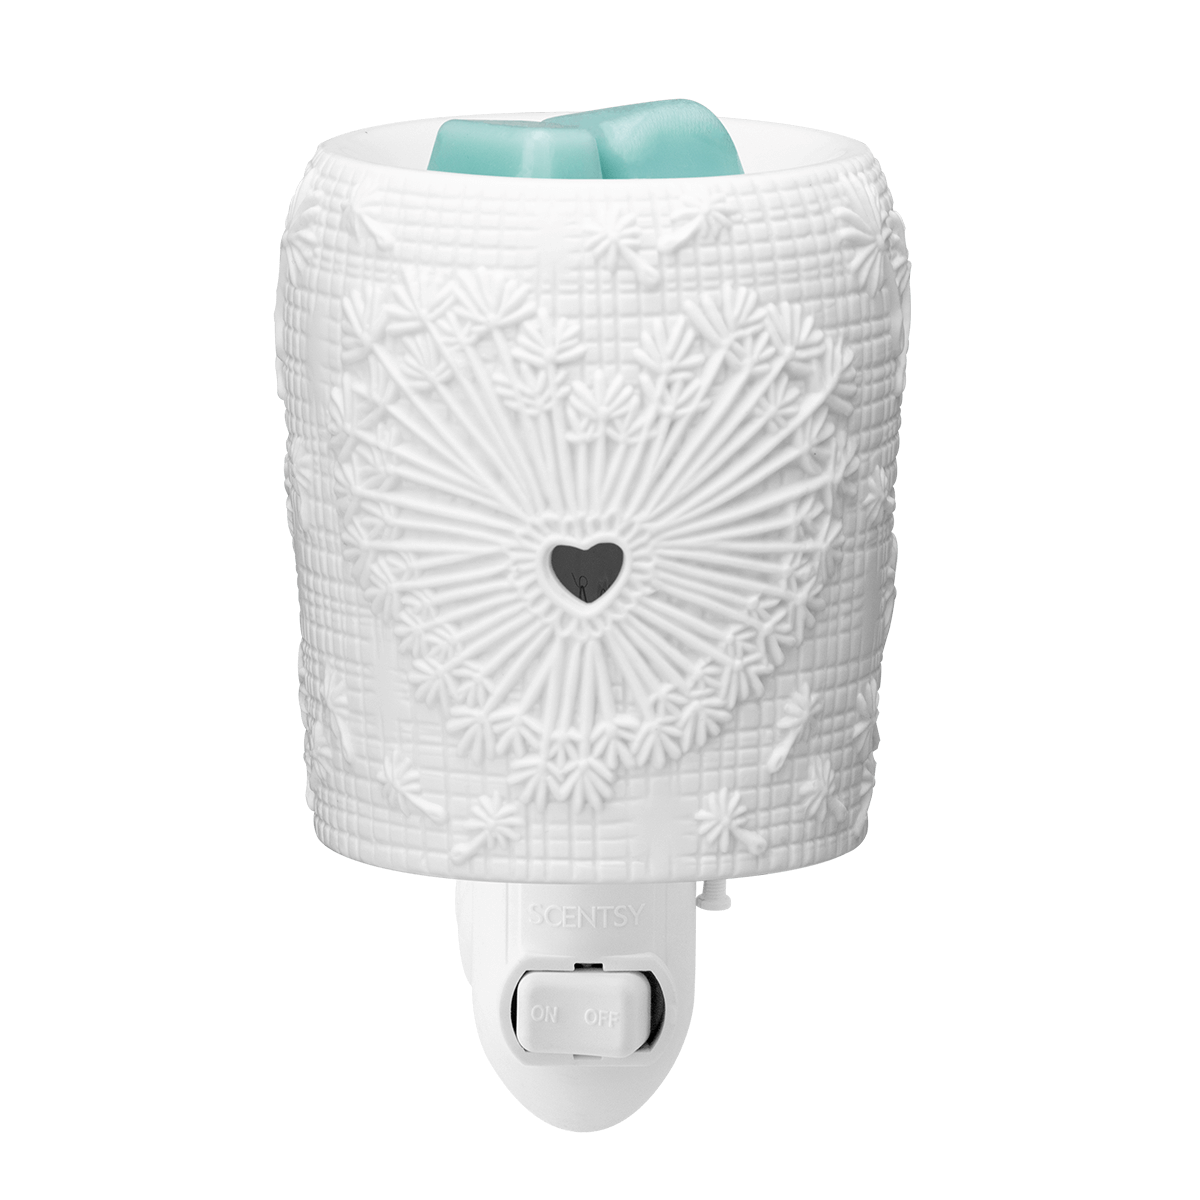 Love Wishes Scentsy Plug in Warmer